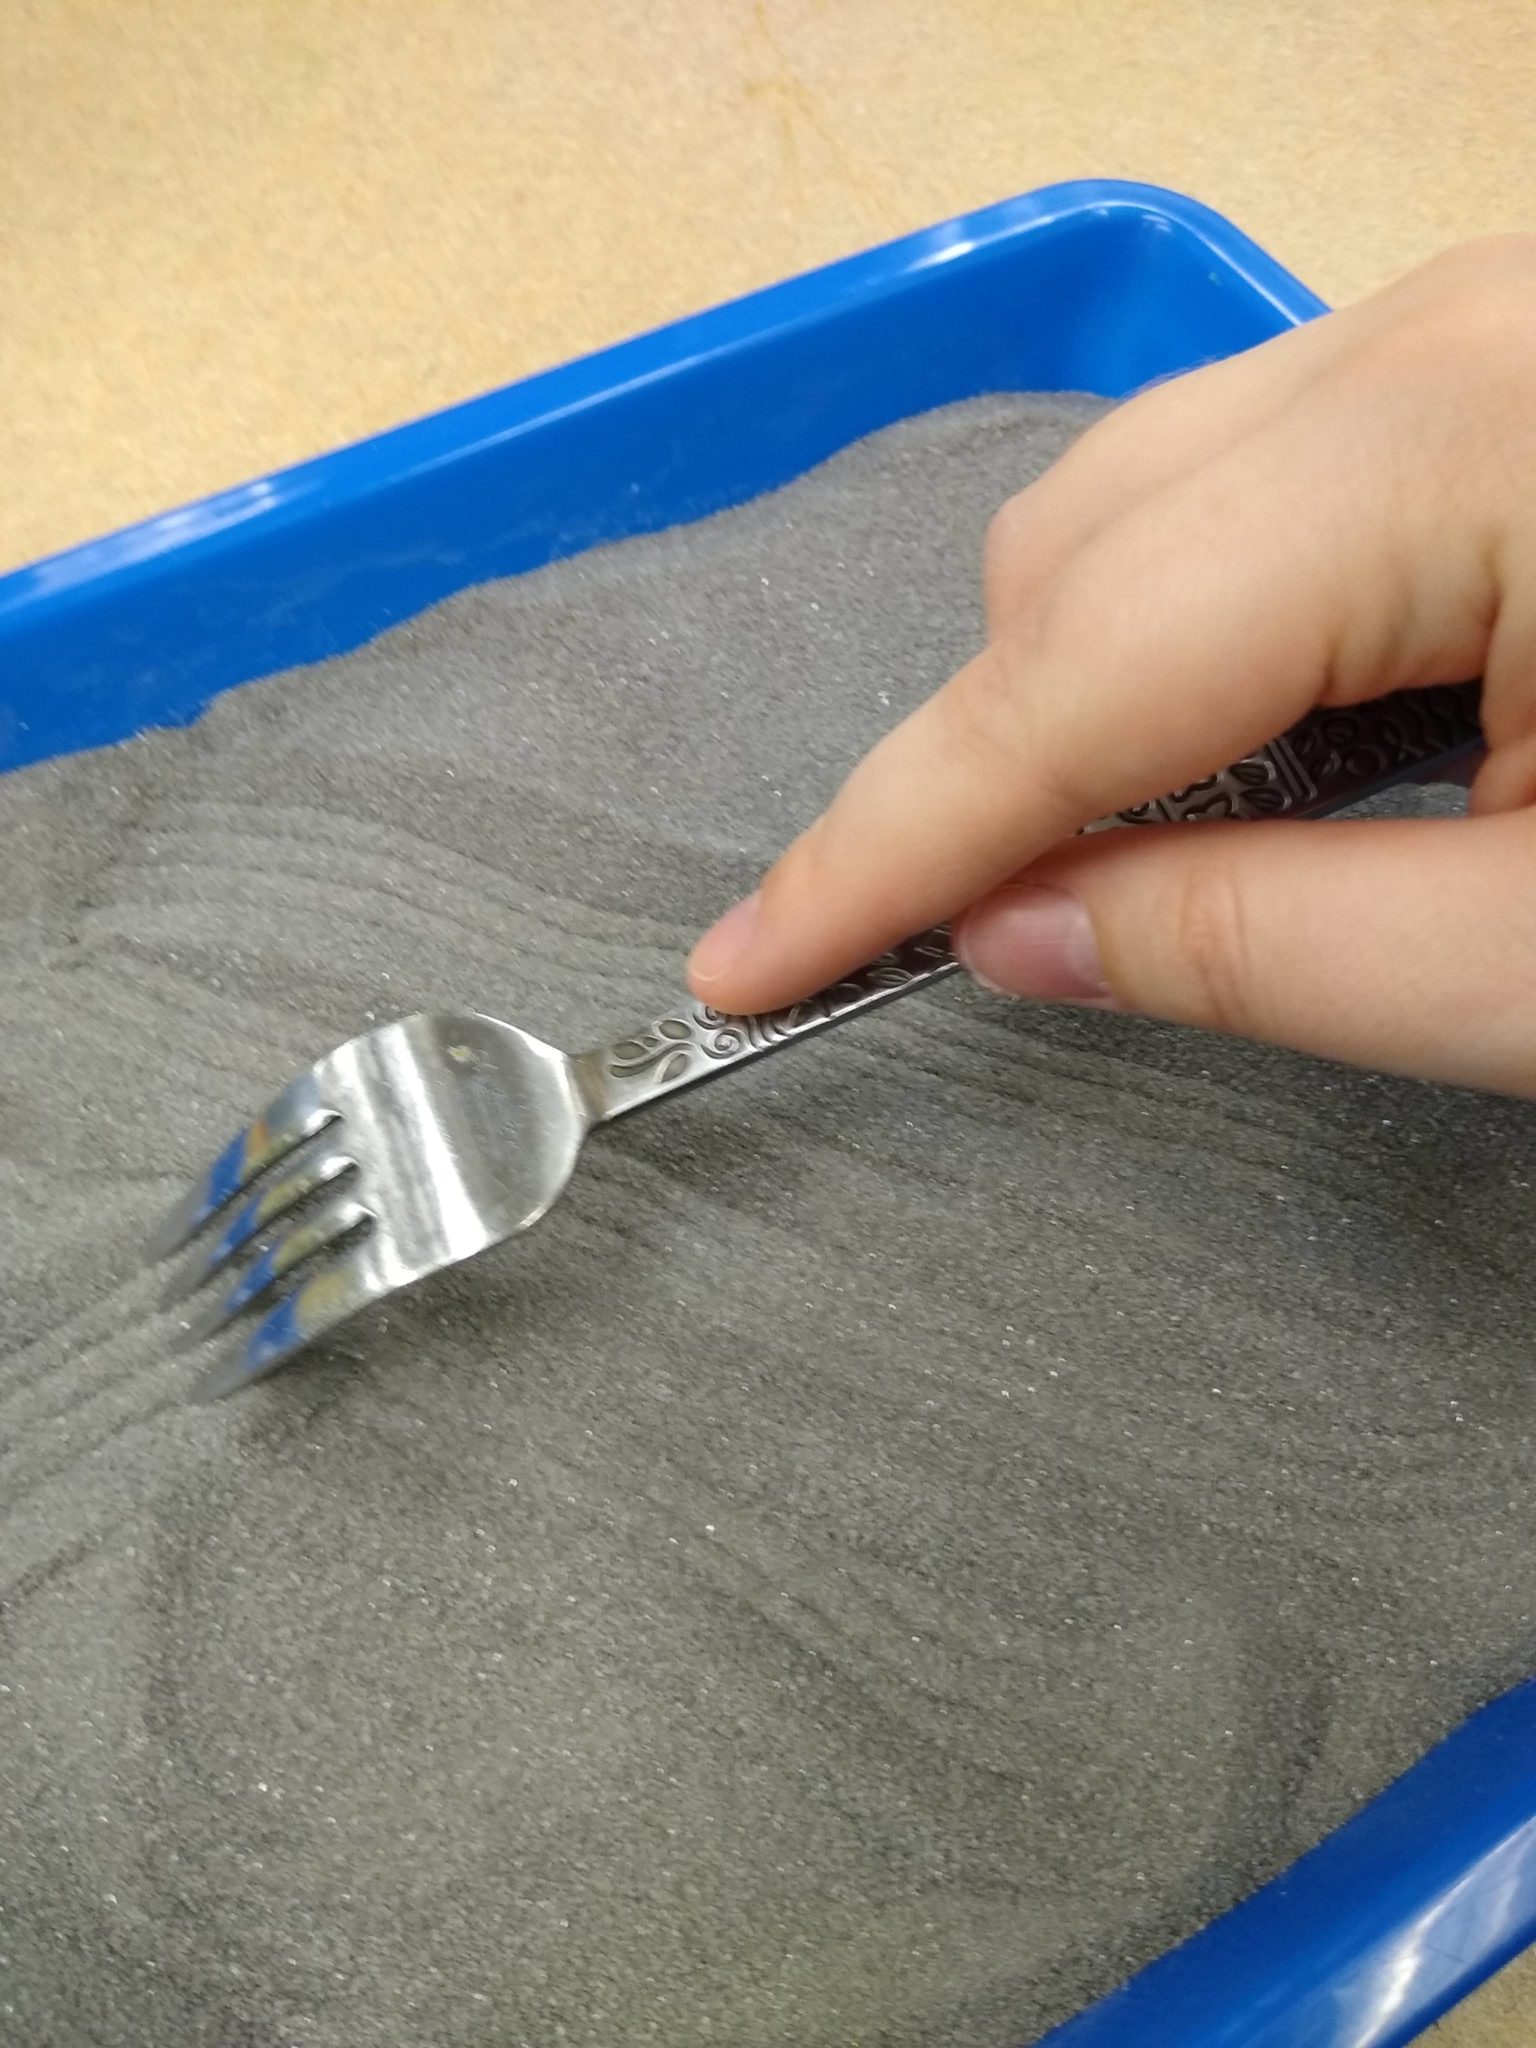 Dragging a fork through the sand to create a pattern of lines. 